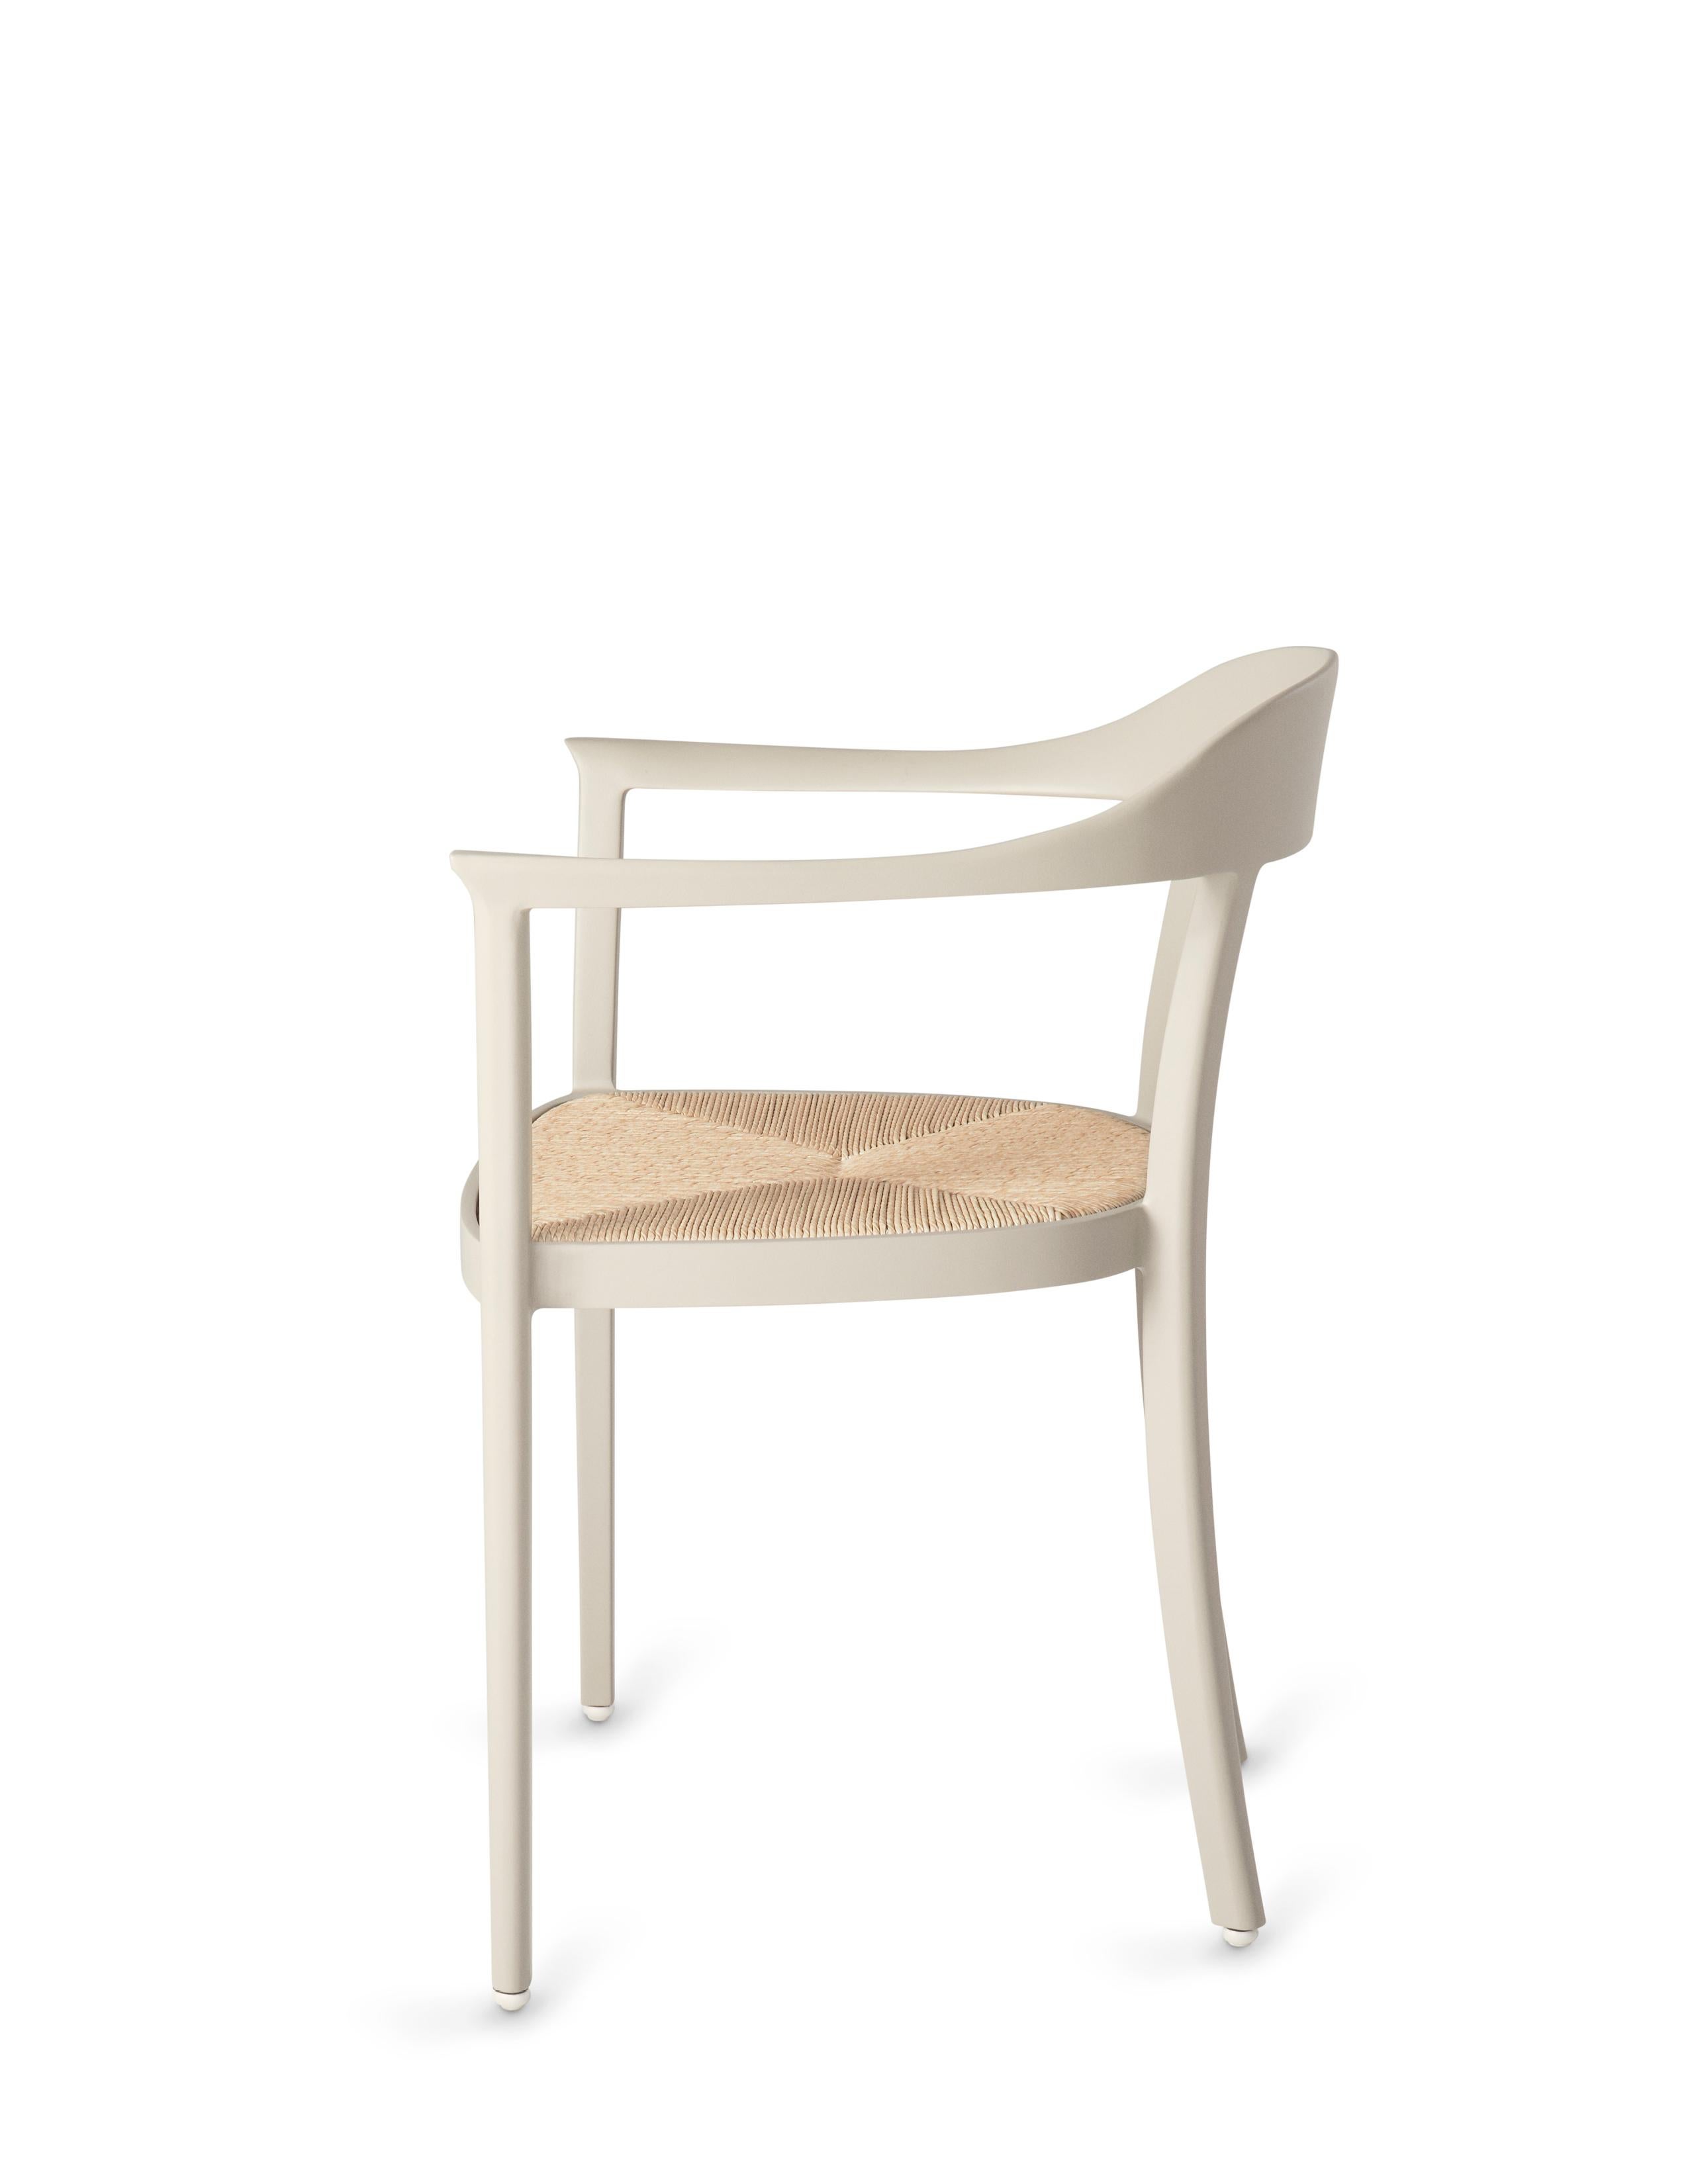 Powder-Coated Chesapeake Dining Armchair, Oyster, Pale Light Grey, Neutral, Outdoor Garden 